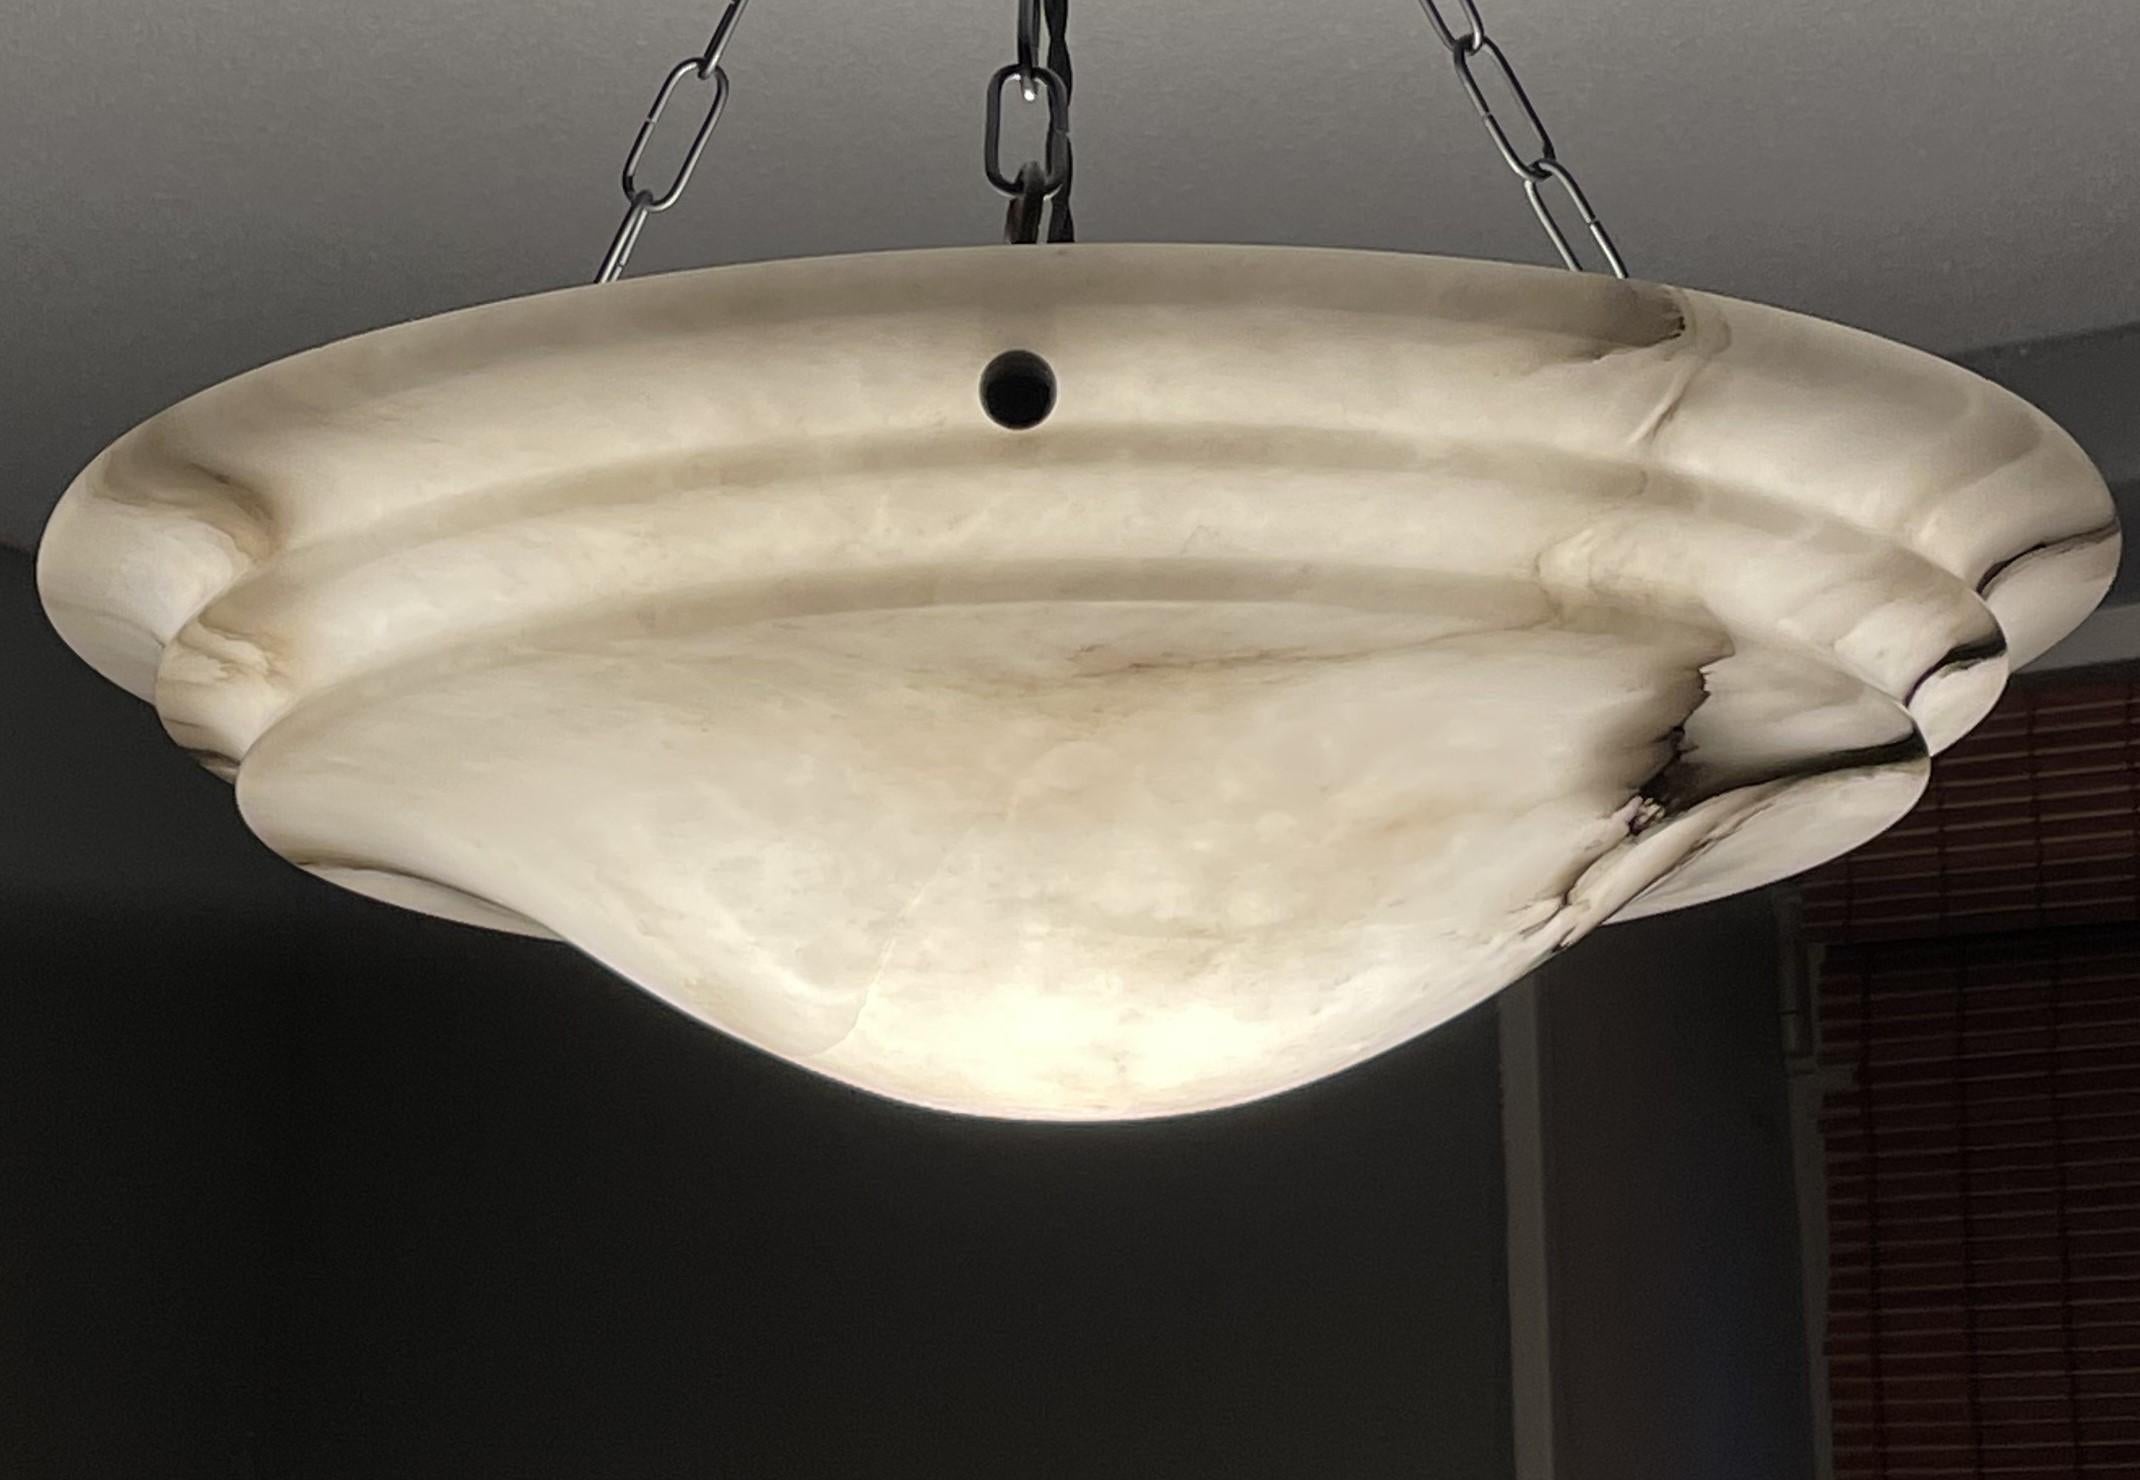 20th Century Handcarved in Layers Art Deco White Alabaster & Black Veins Pendant / Chandelier For Sale